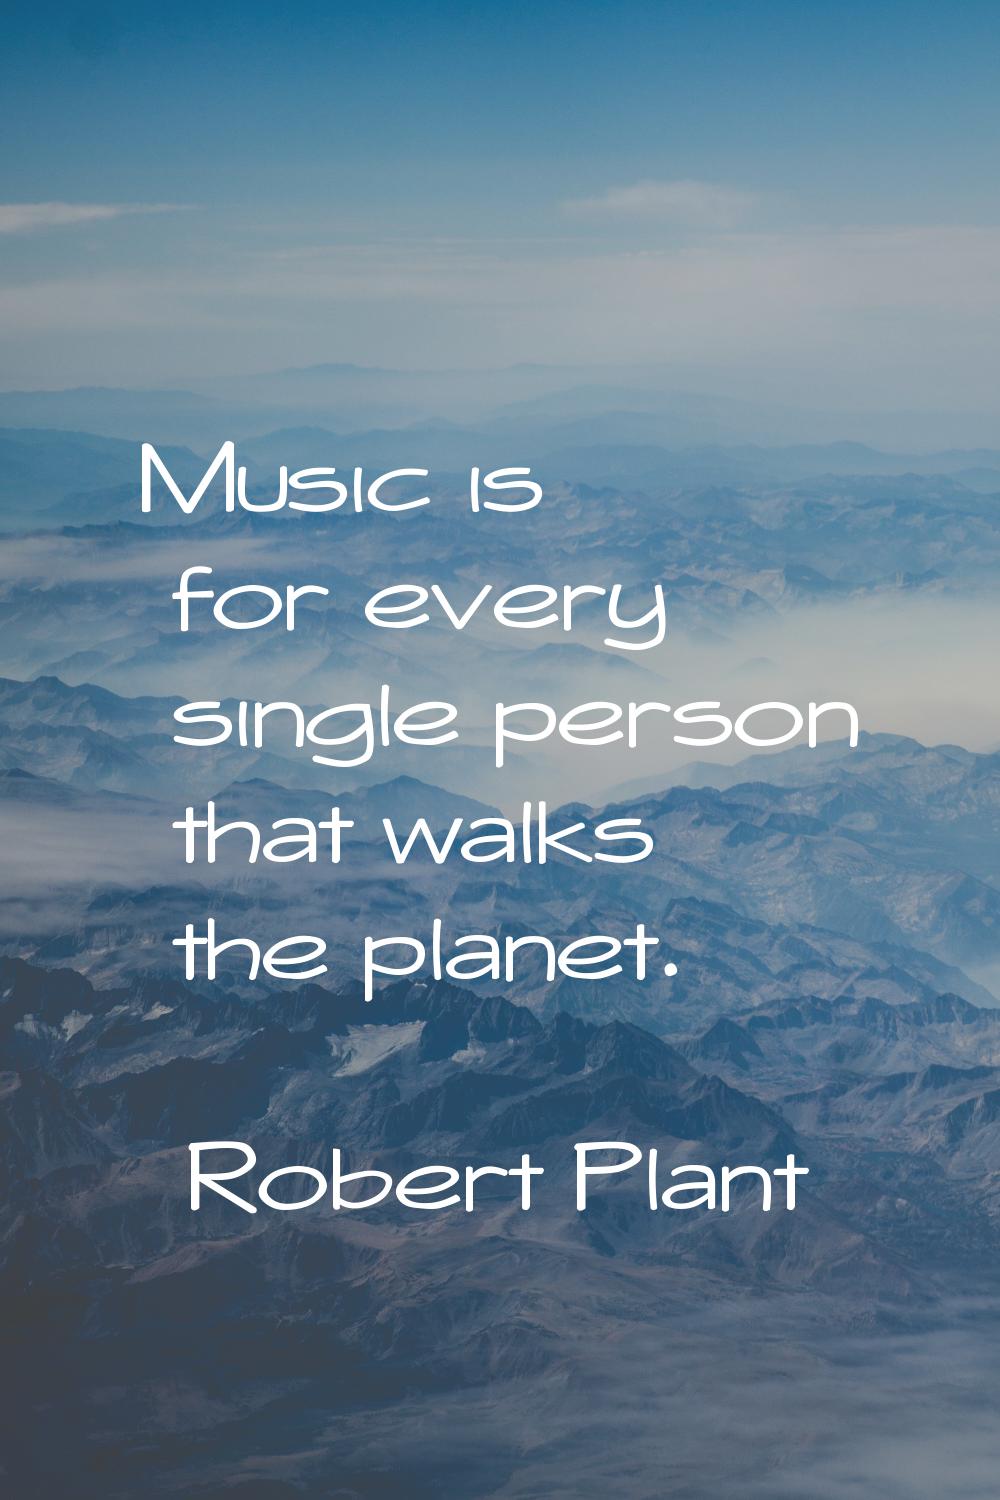 Music is for every single person that walks the planet.